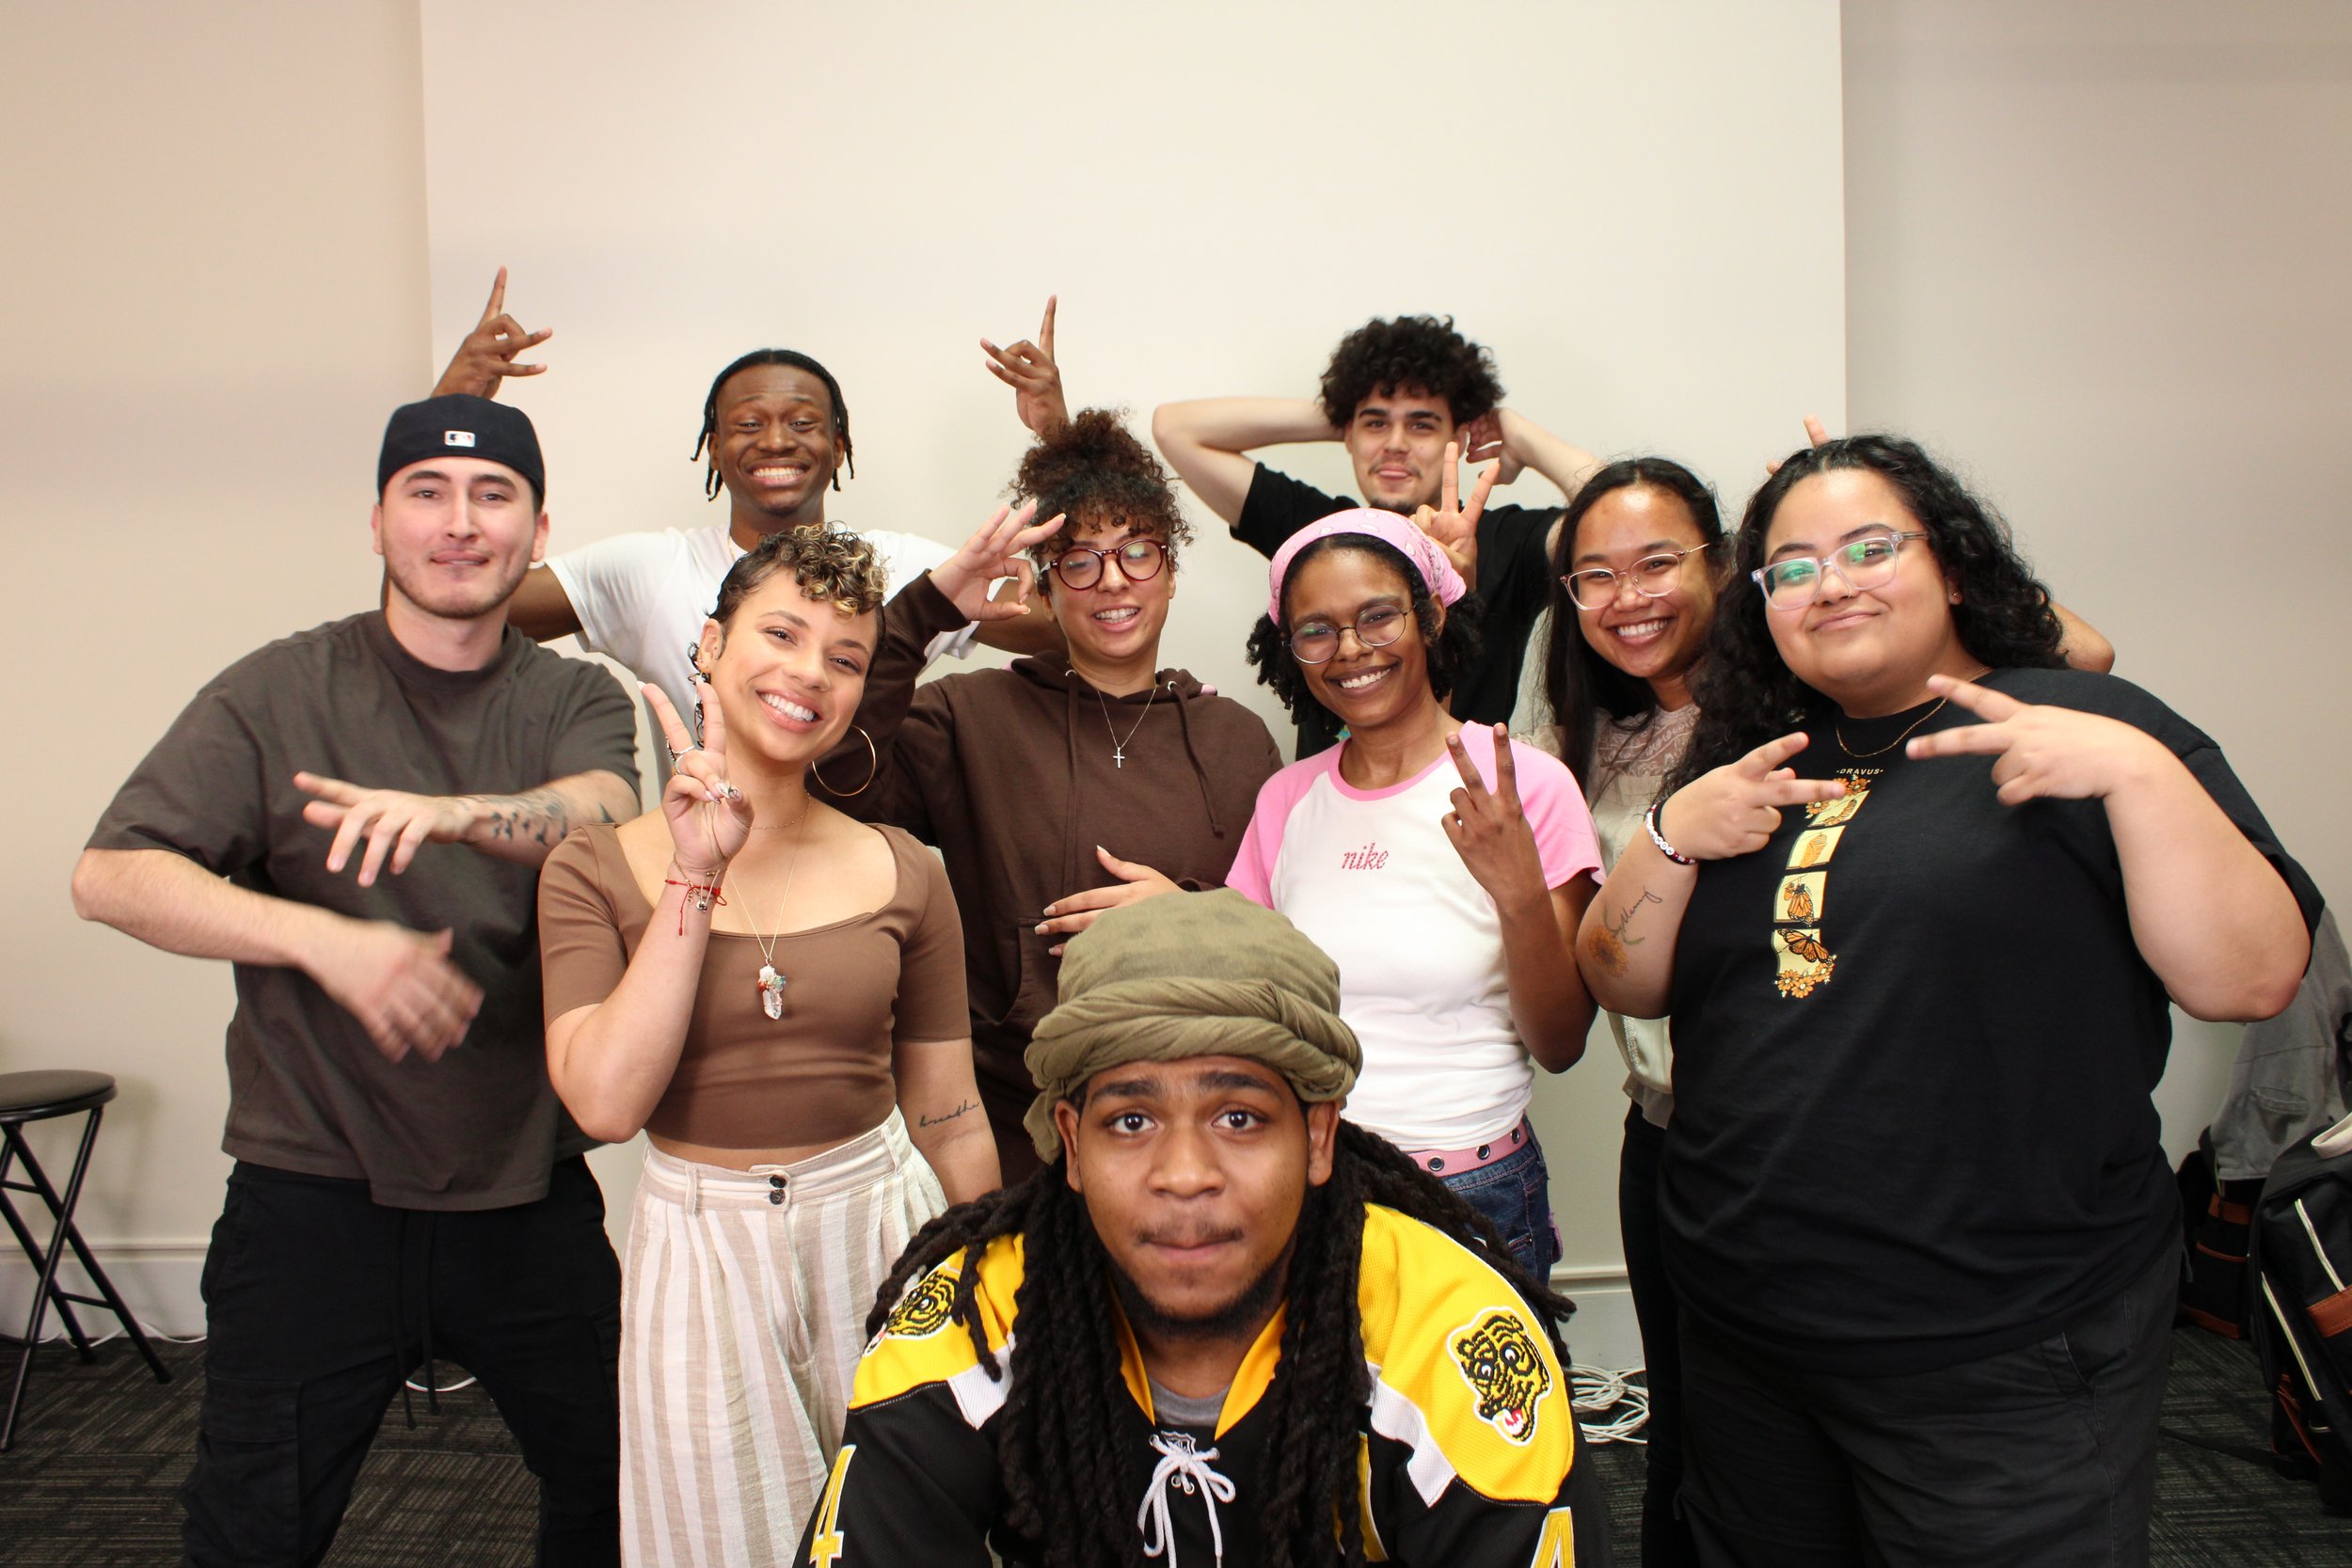   Cohort 6 of the Media Arts Apprenticeship poses for a group photo during picture day  